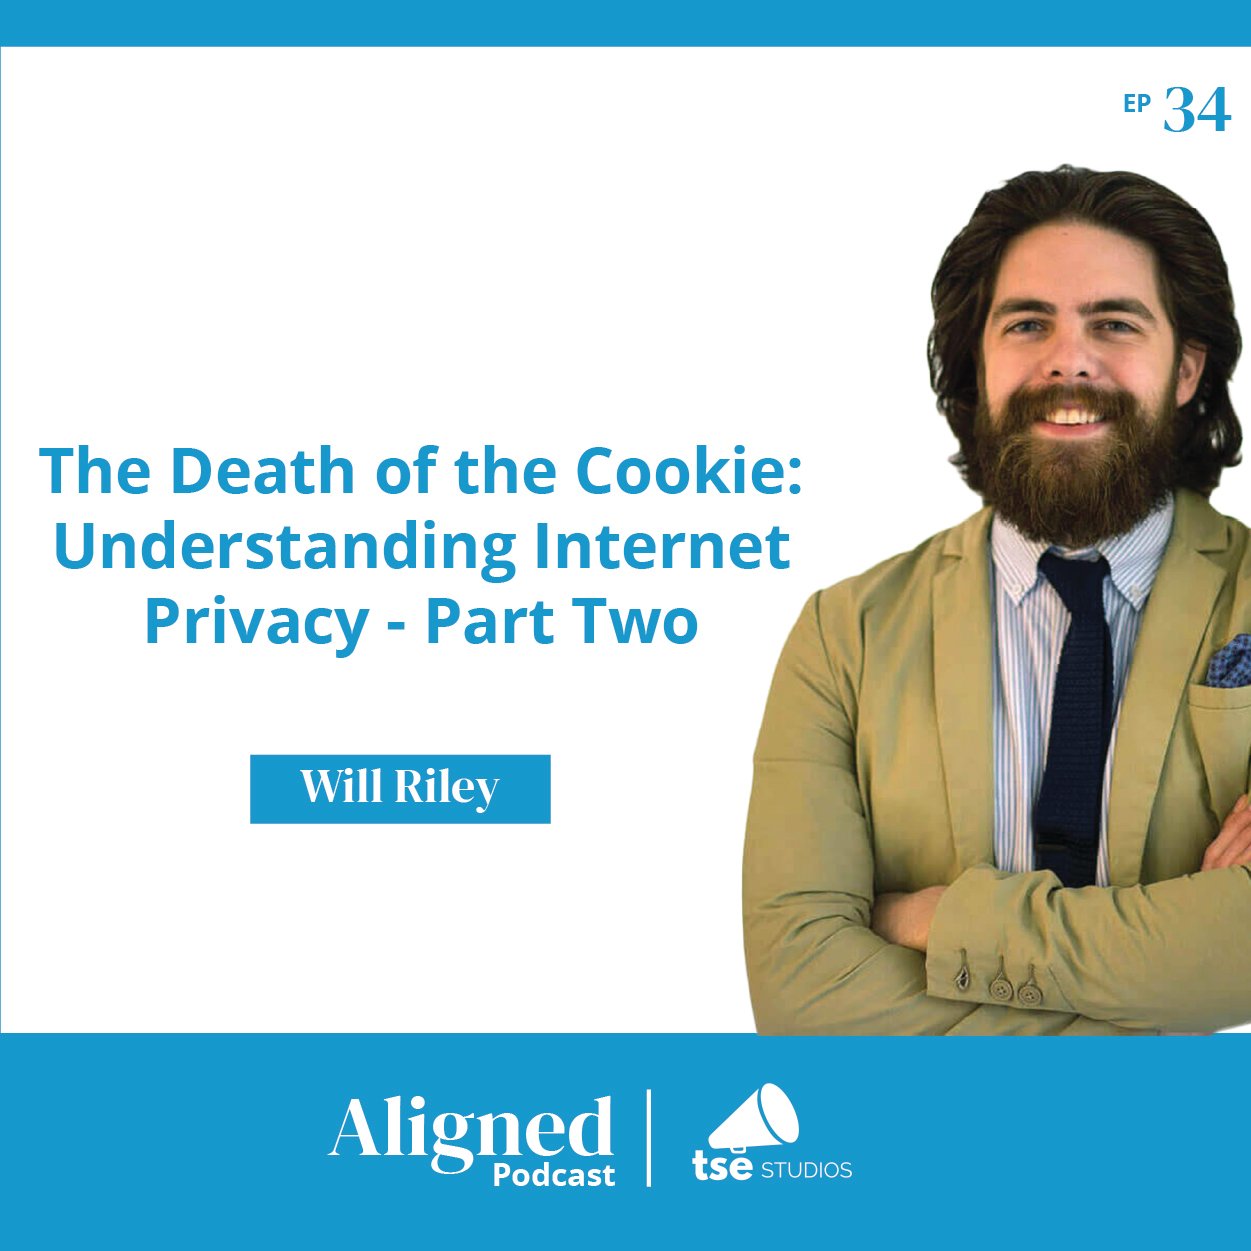 The Death of the Cookie: Understanding Internet Privacy - Part II